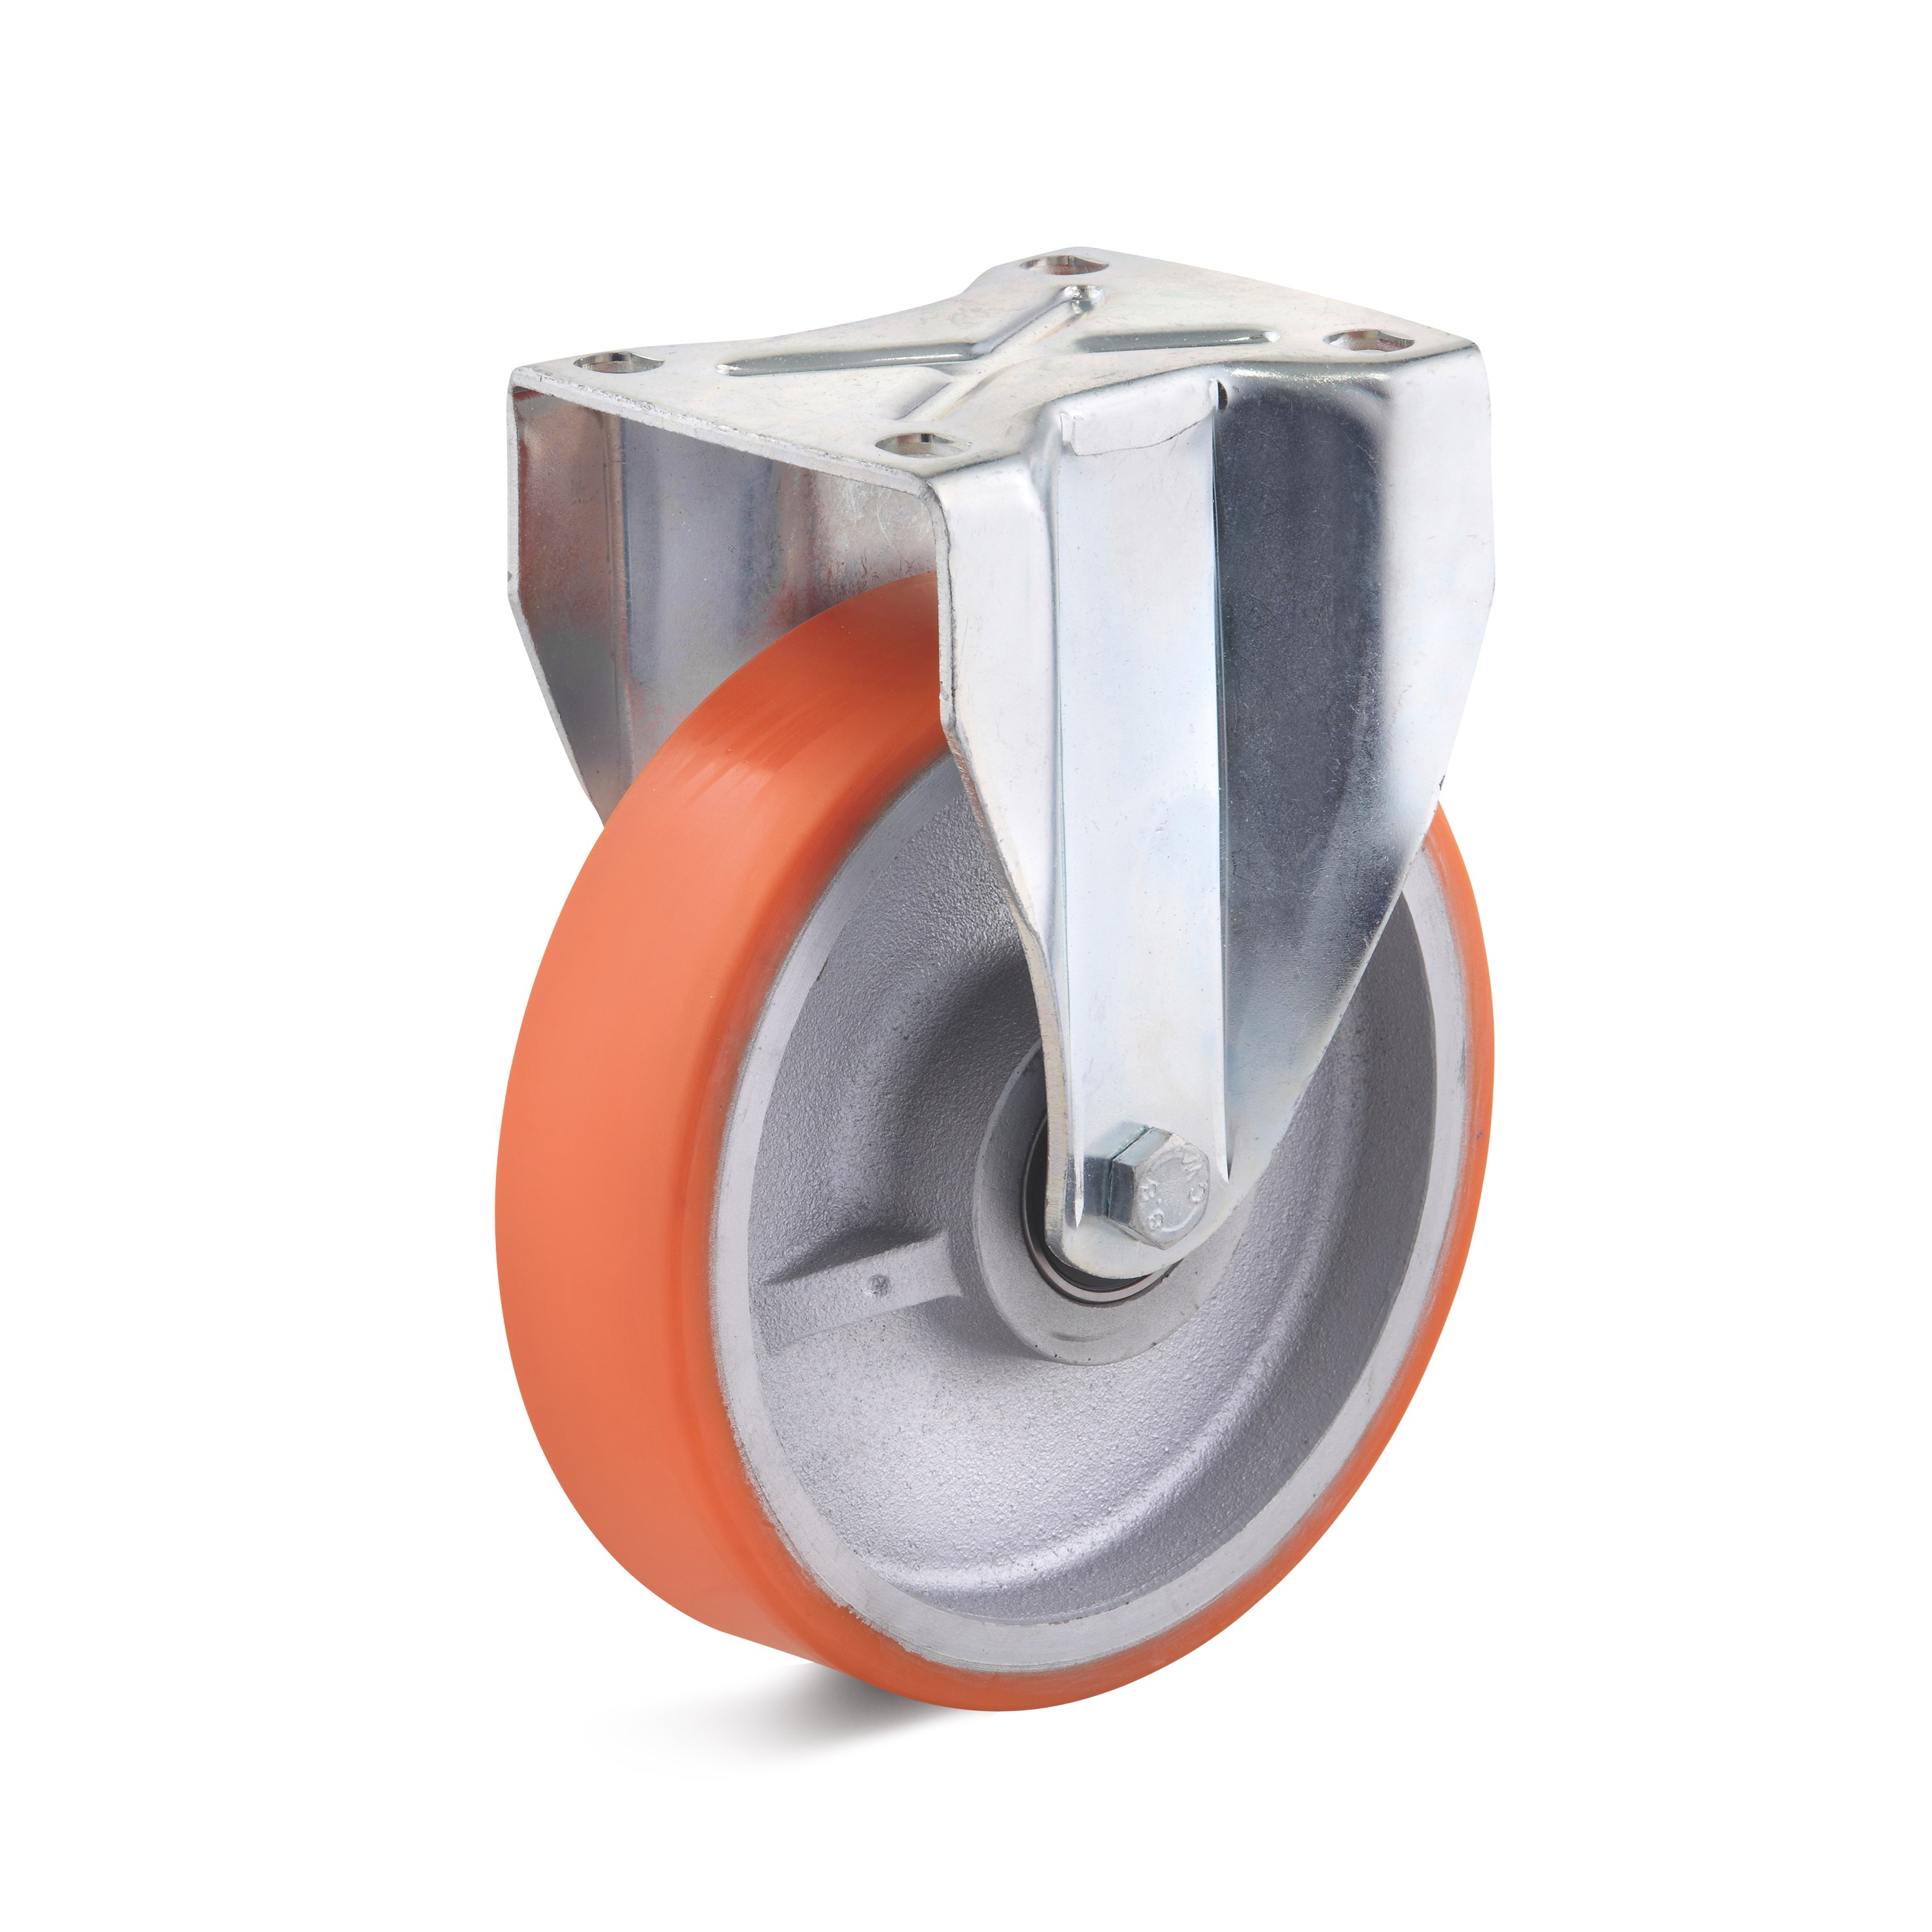 Heavy duty fixed castor with polyurethane wheel, housing made of welded steel construction